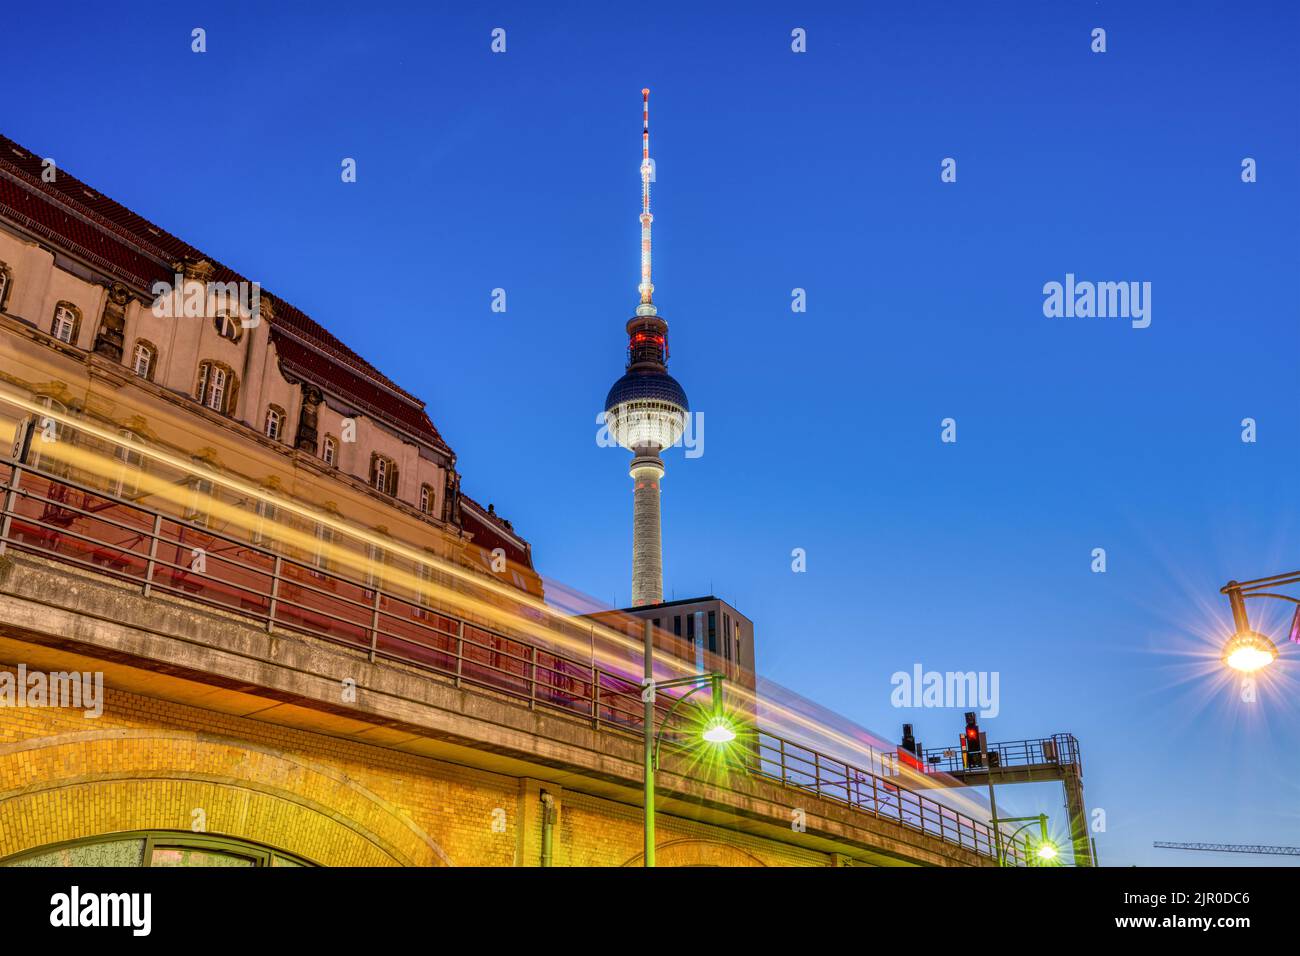 The iconic TV Tower in Berlin at dusk with a motion blurred commuter train Stock Photo